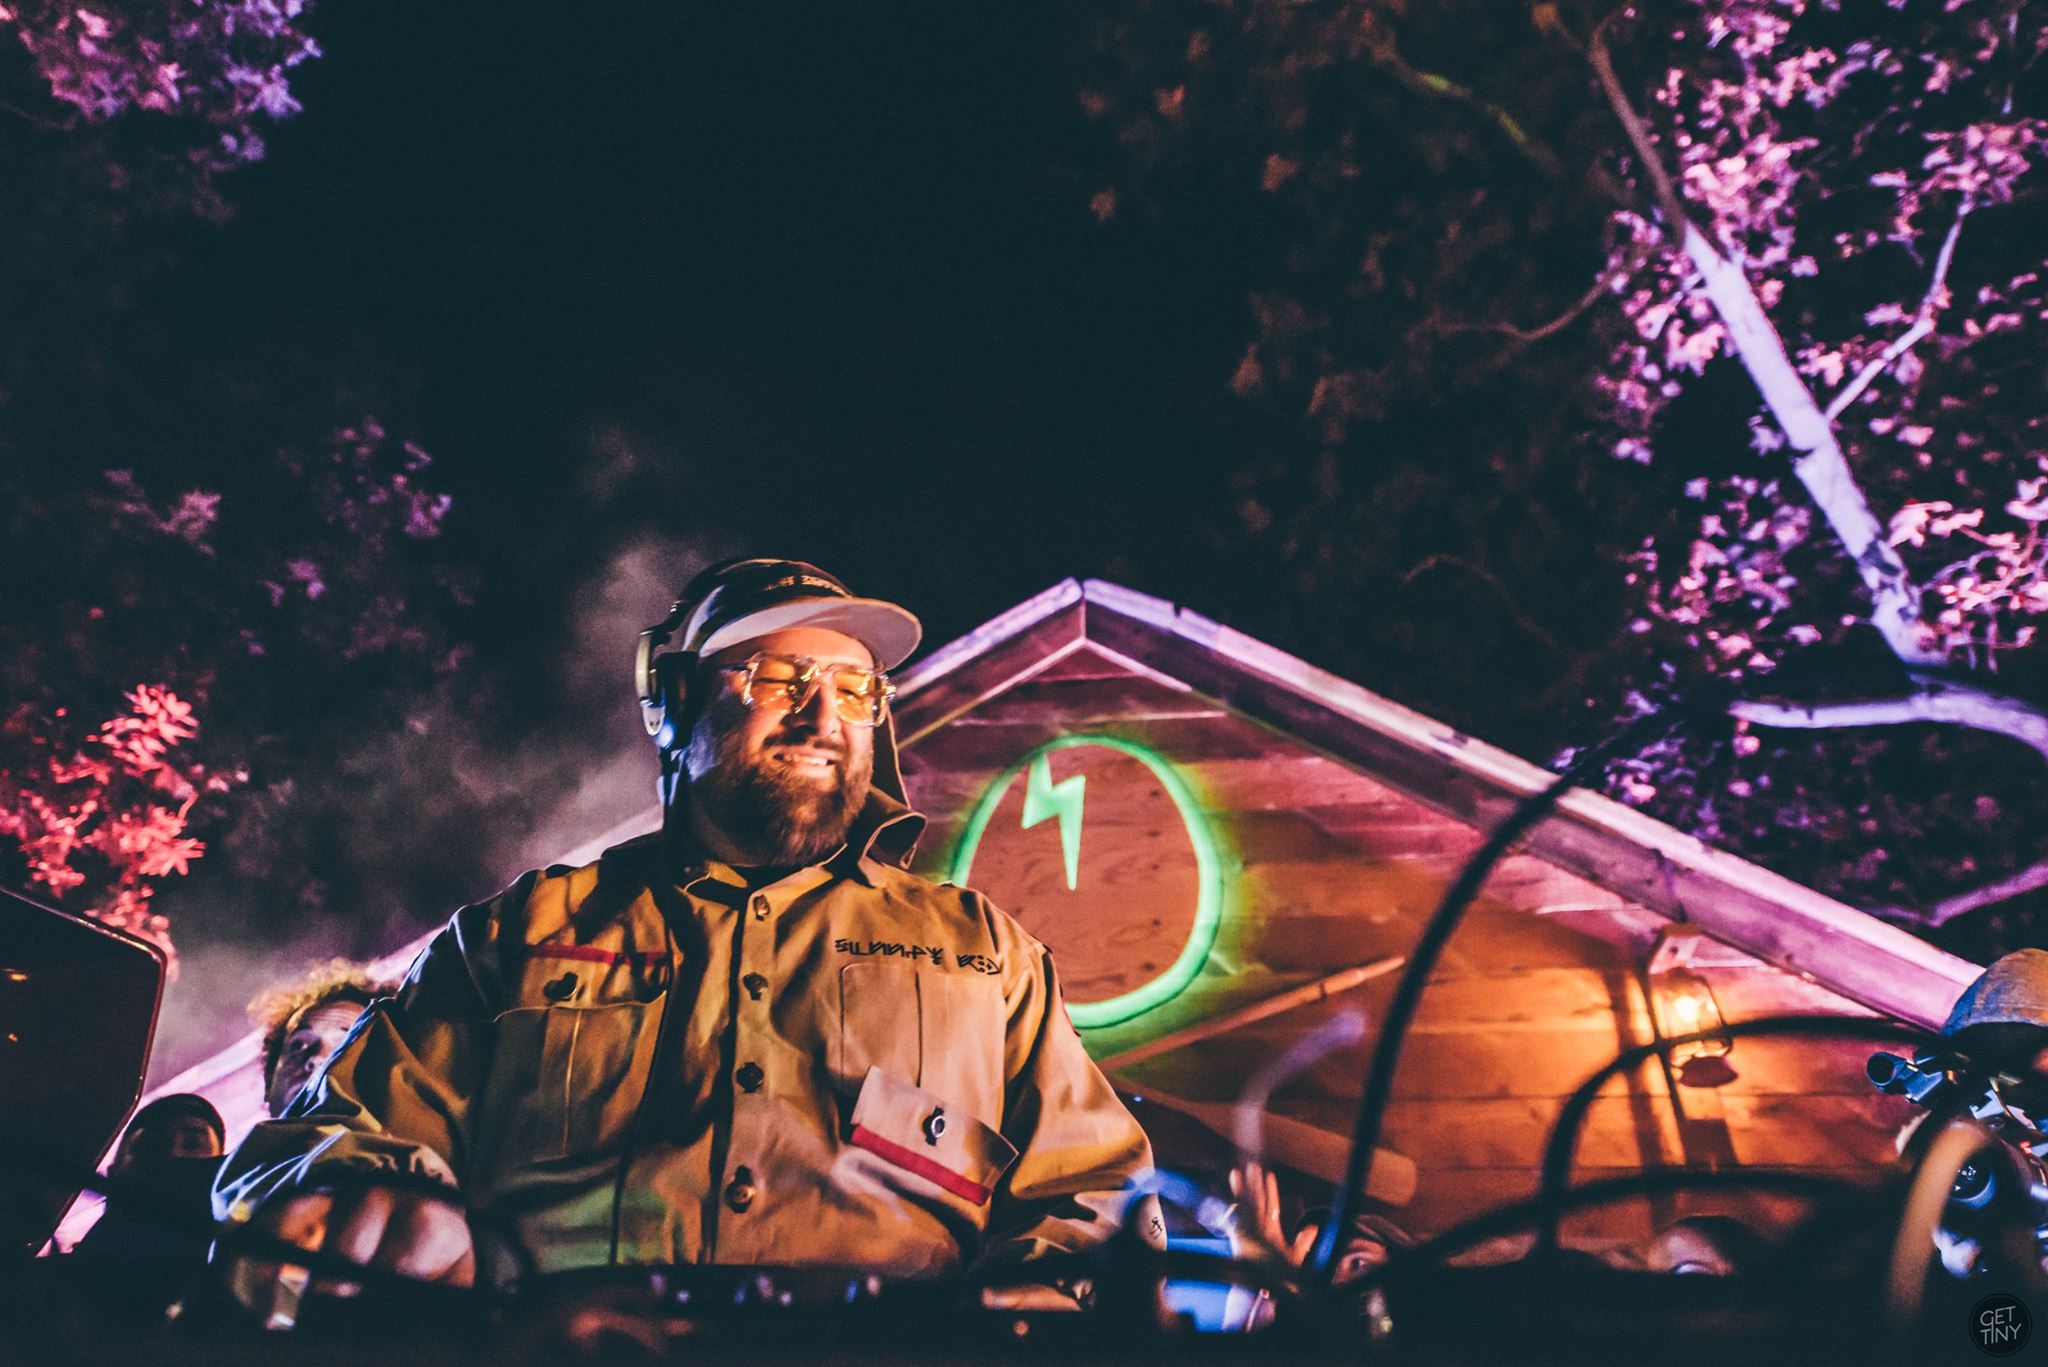 ICYMI: Barclay Crenshaw Drops Extraterrestrial-Steeped Hip-Hop ‘Transmission 002 Mixtape’